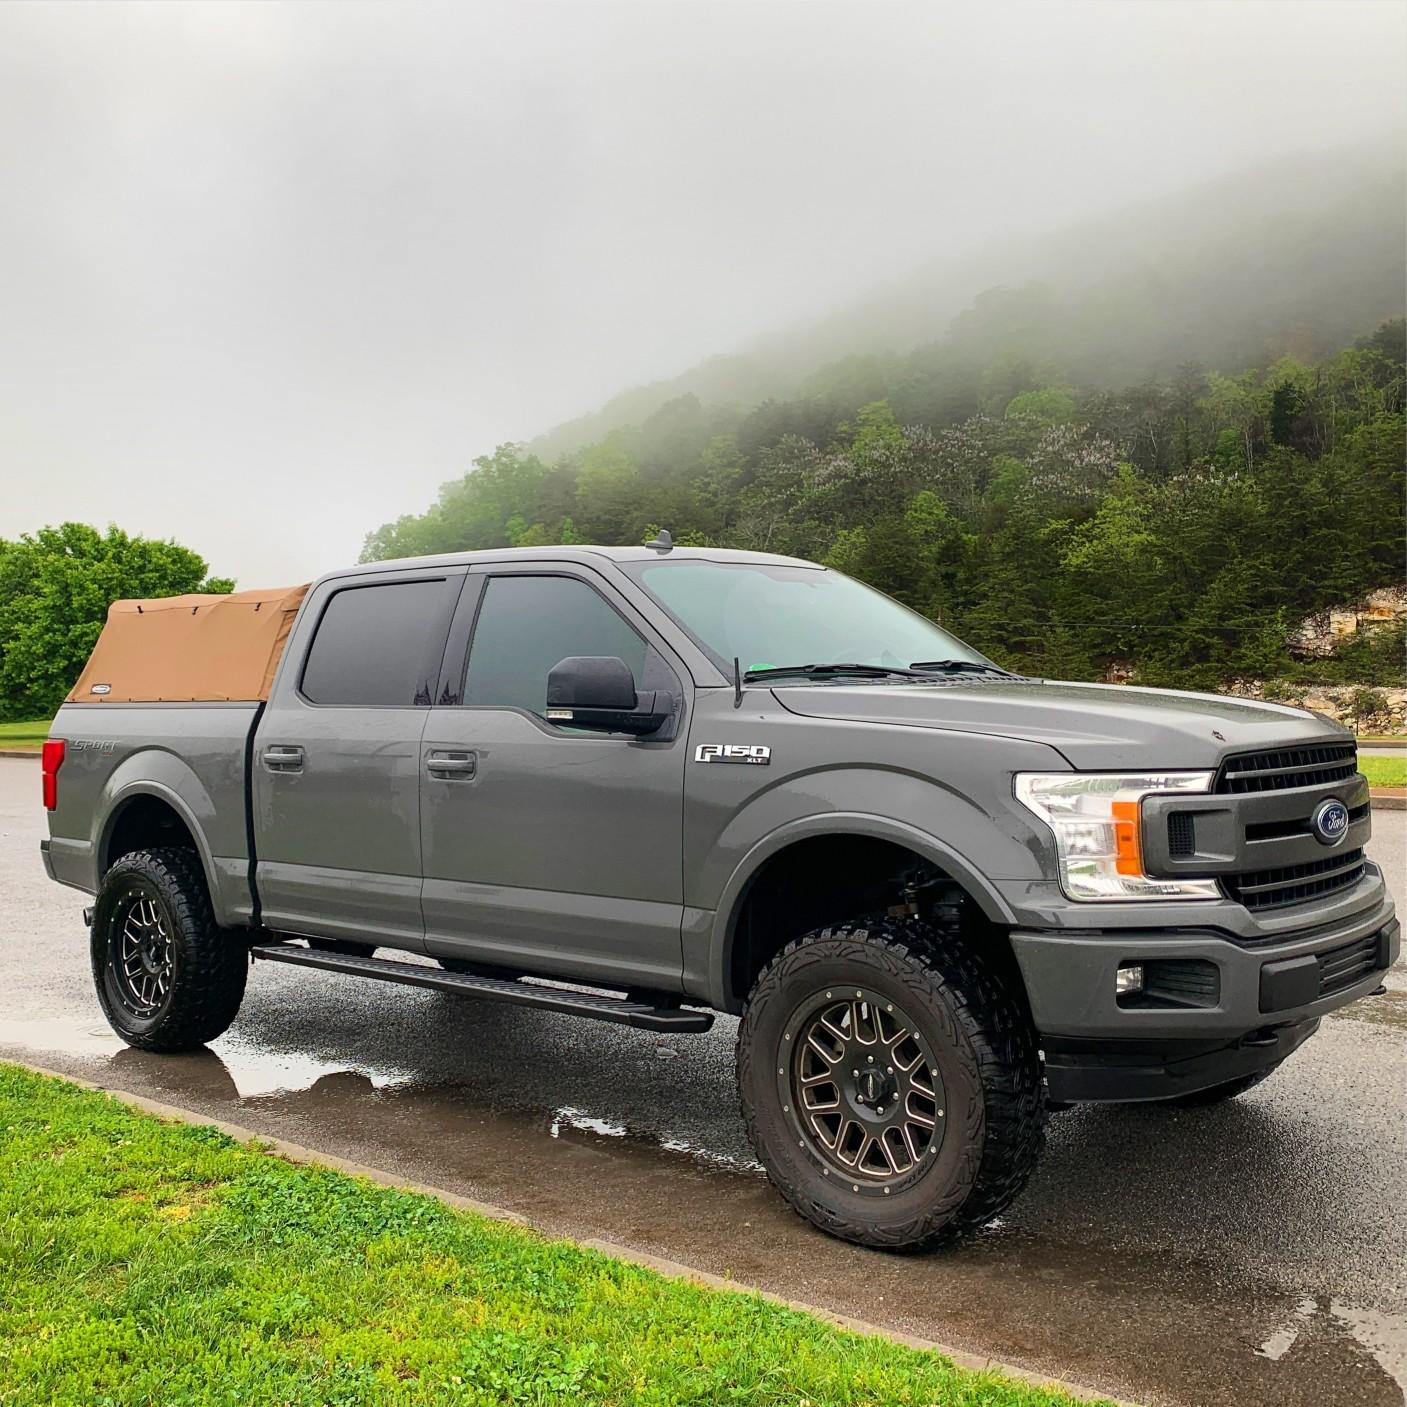 If you want to lift your truck it’s good to know the difference between a body lift and a suspension lift so you can pick one that suits your needs.